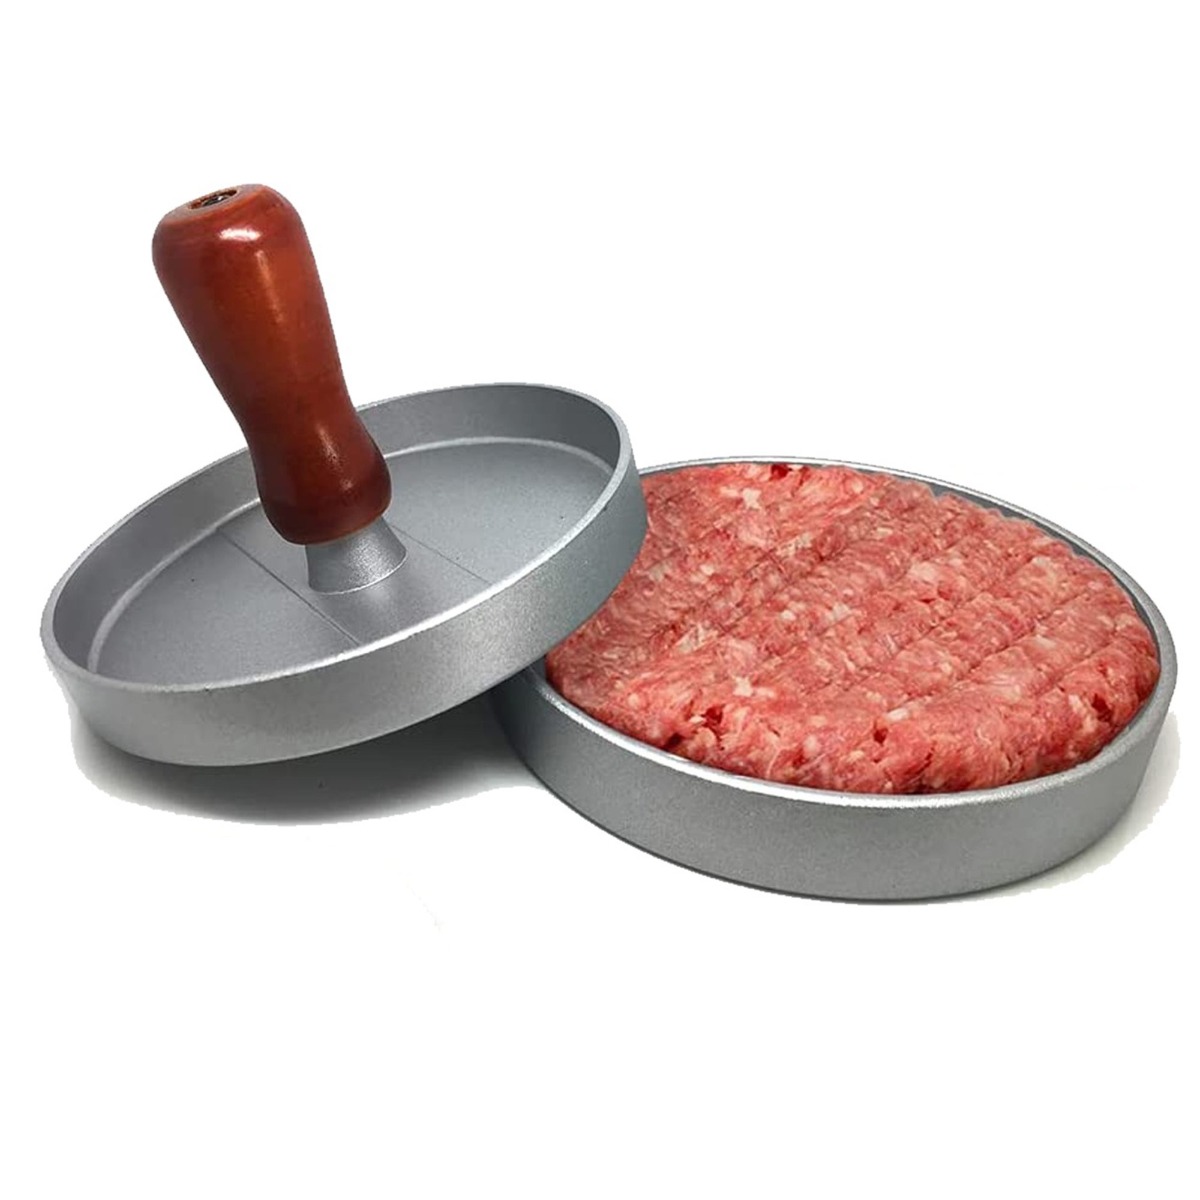 Burger Press, with wooden handle - Dream House®